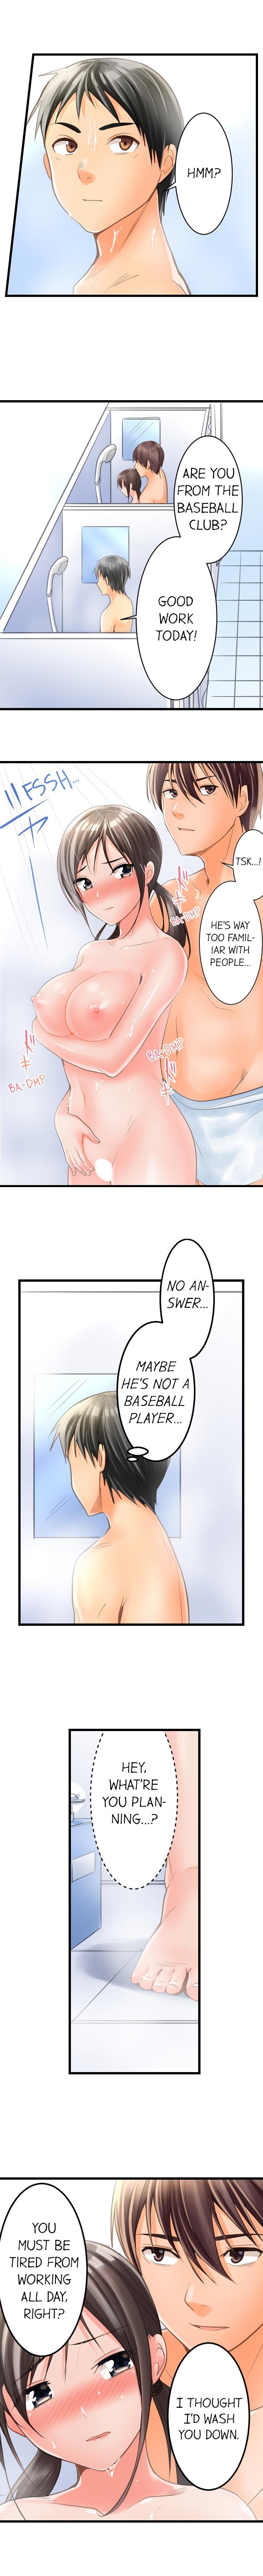 The Day She Became a Sex Toy (Complete] 41